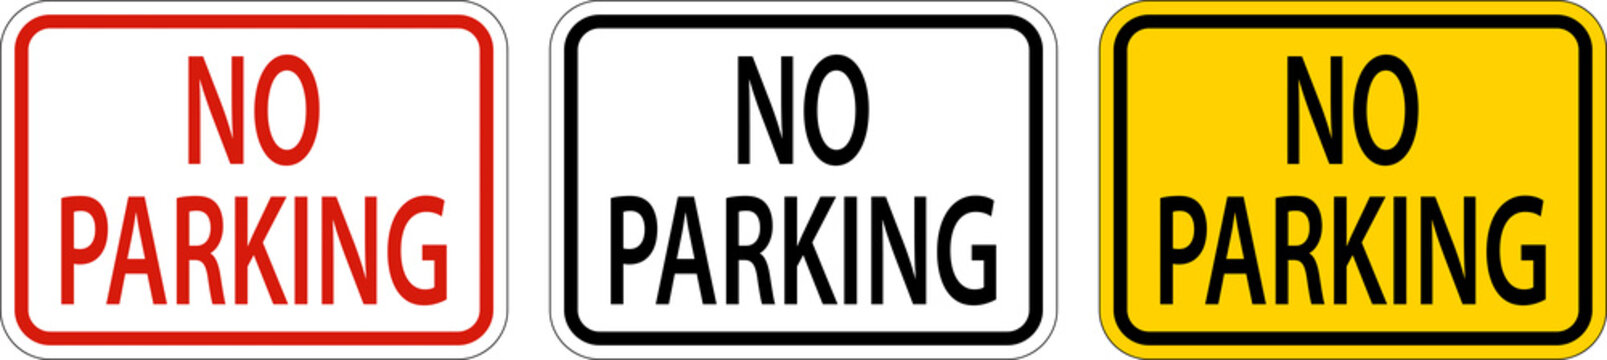 No Parking Sign On White Background